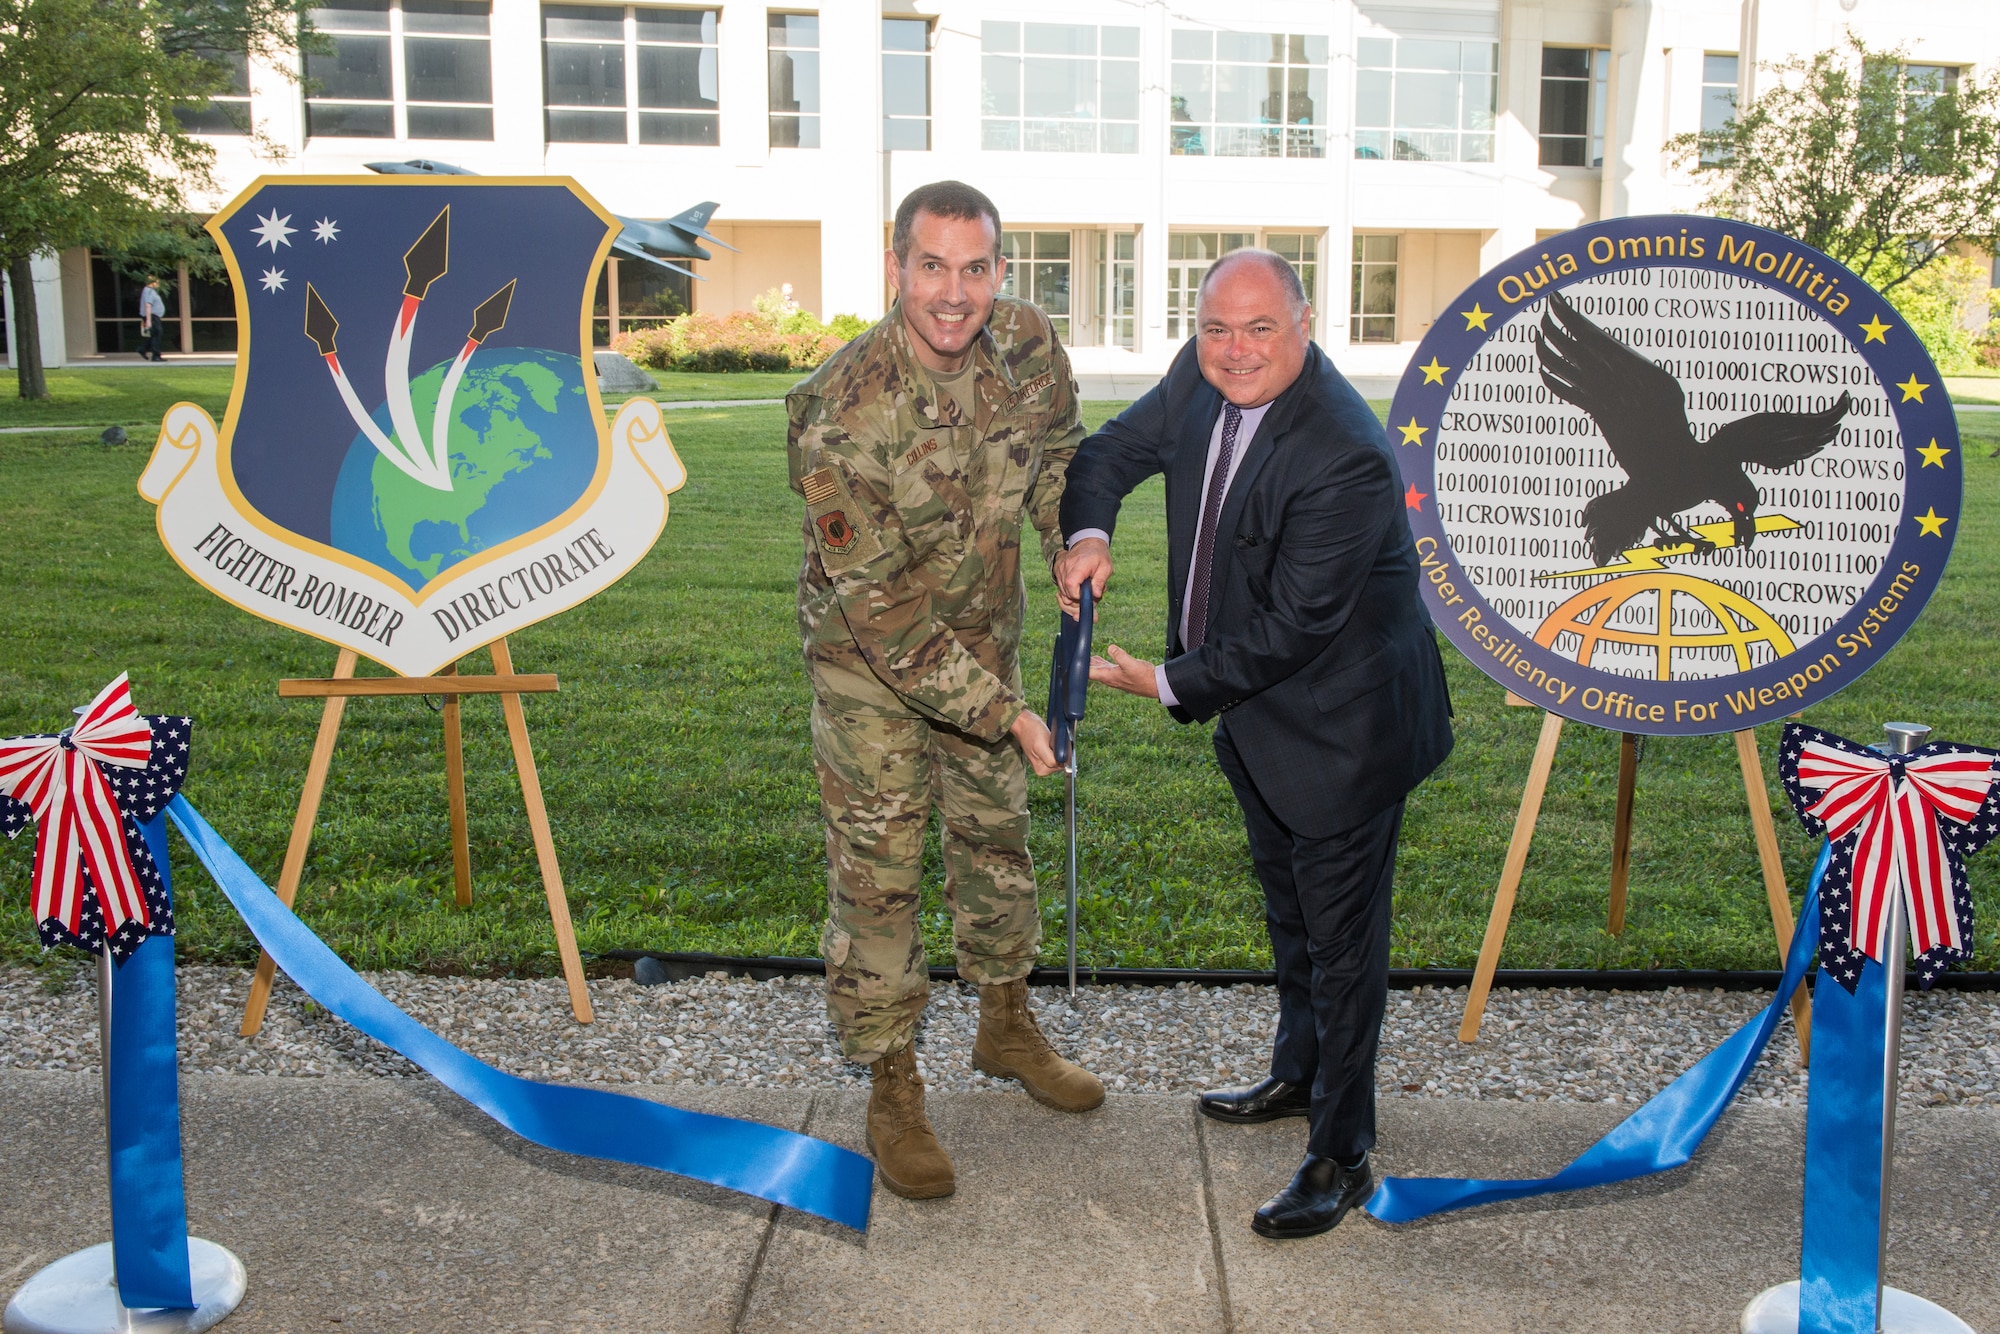 Brig. Gen. Heath Collins, Program Executive Officer for Fighters and Bombers and Joseph Bradley, director for CROWS, officially open a cyber defense facility for the Fighters and Bombers Directorate. (U.S. Air Force photo / Wesley Farnsworth)